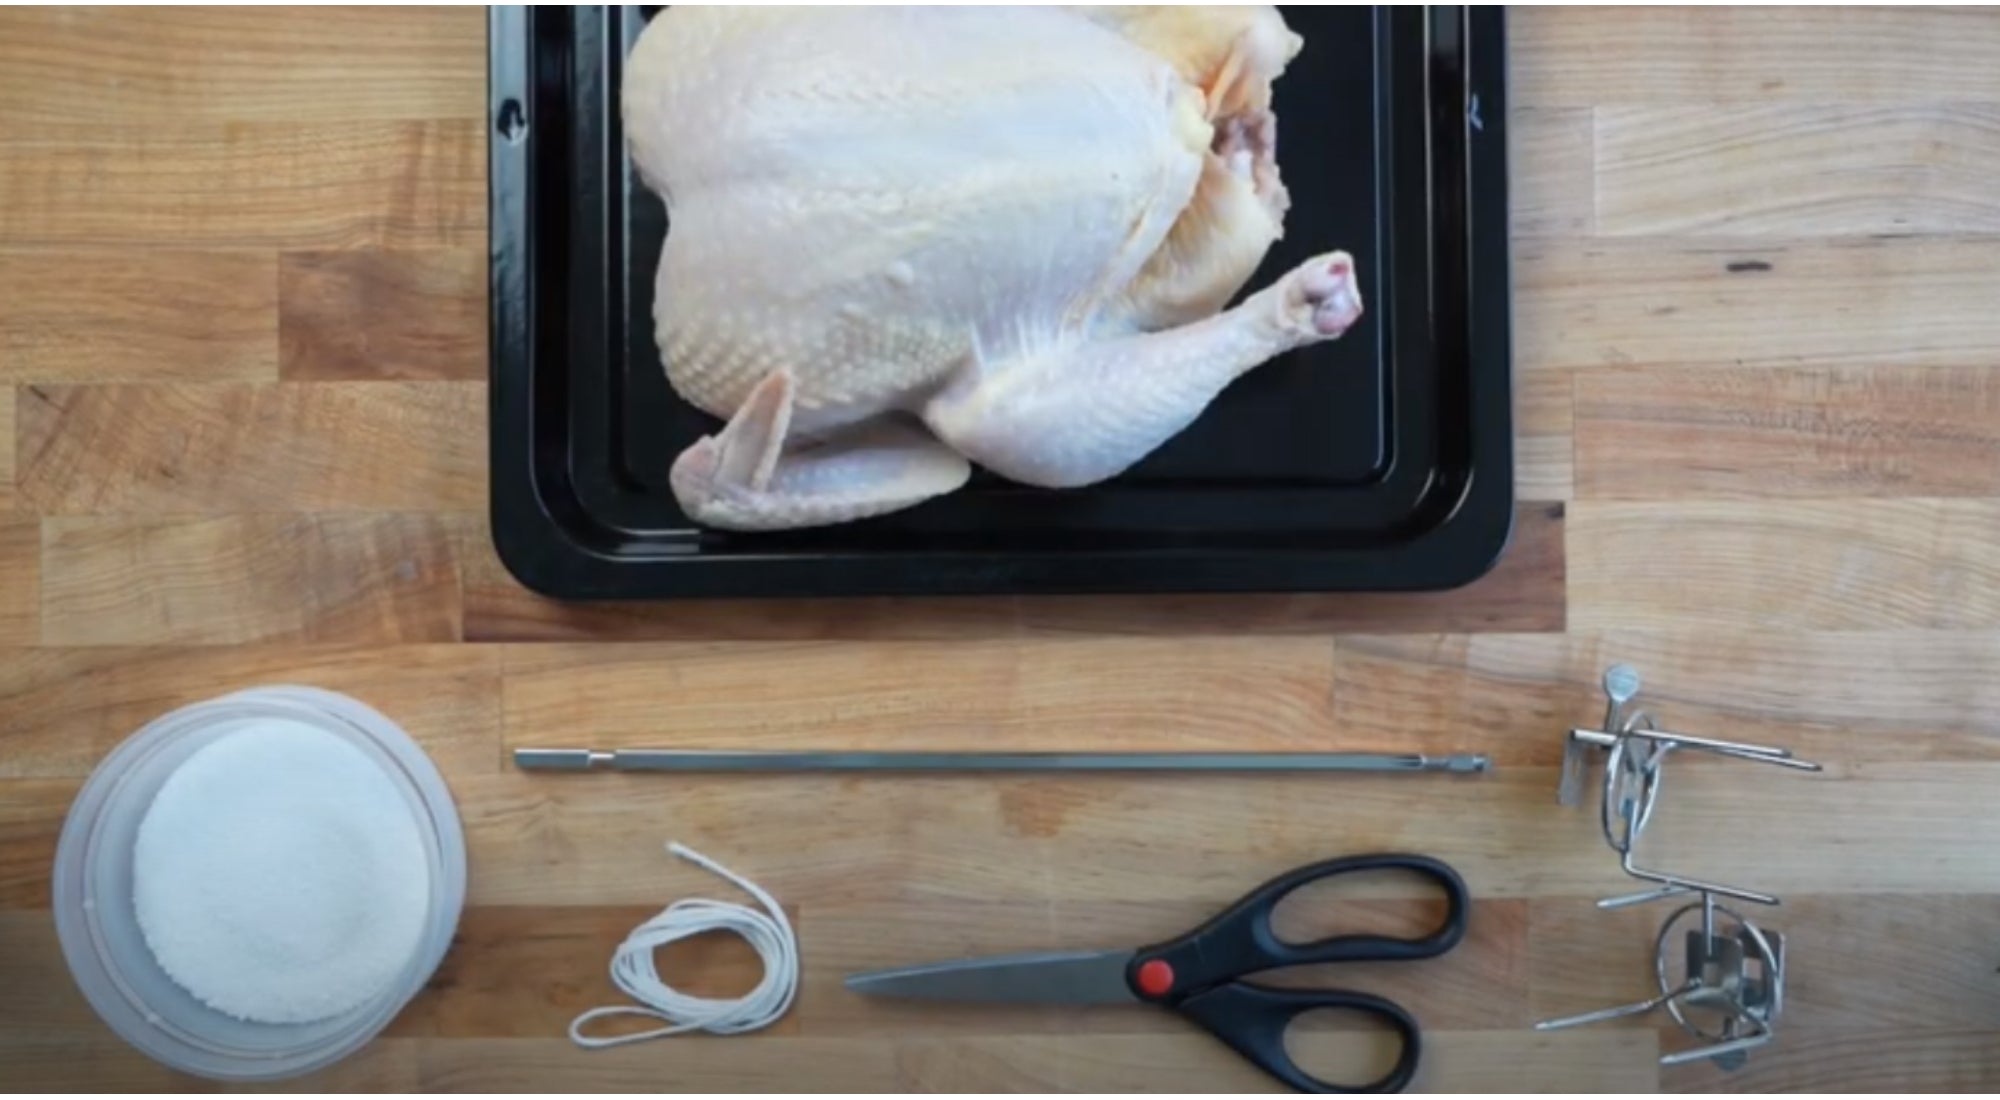 Supplies You Need to Truss Your Rotisserie Chicken